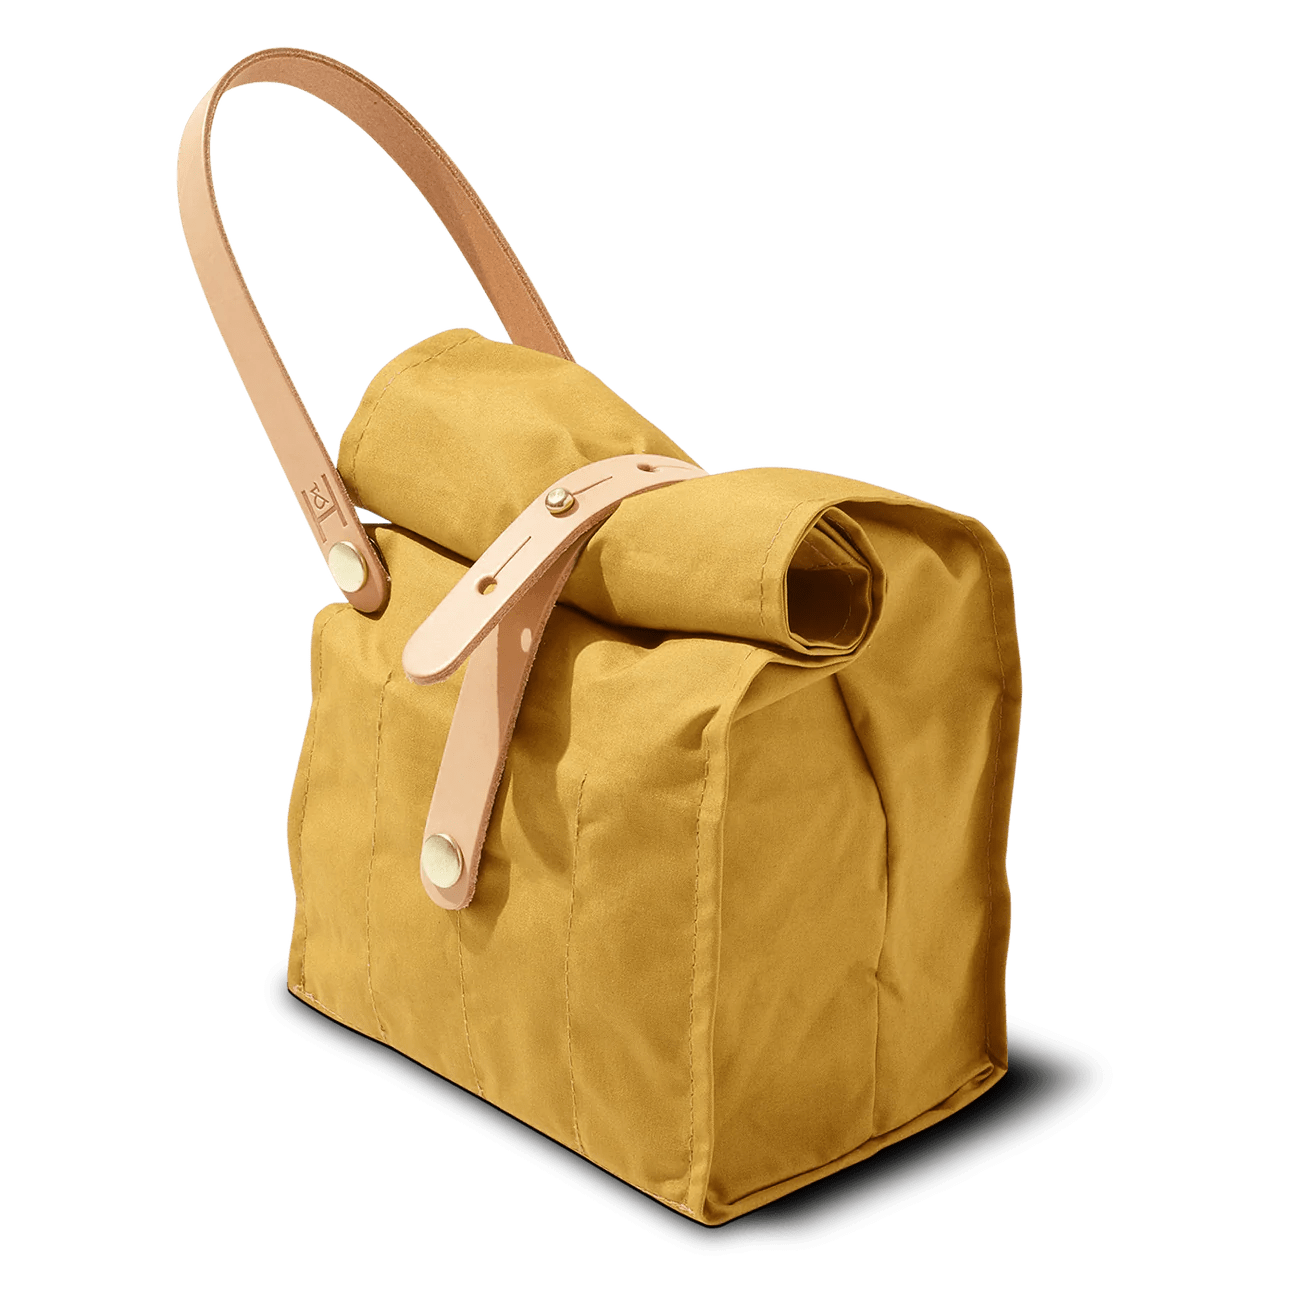 Hide & Hammer #08 Small Roll Top Bag - Mustard - Bags - Coming Soon - The Little Yarn Store